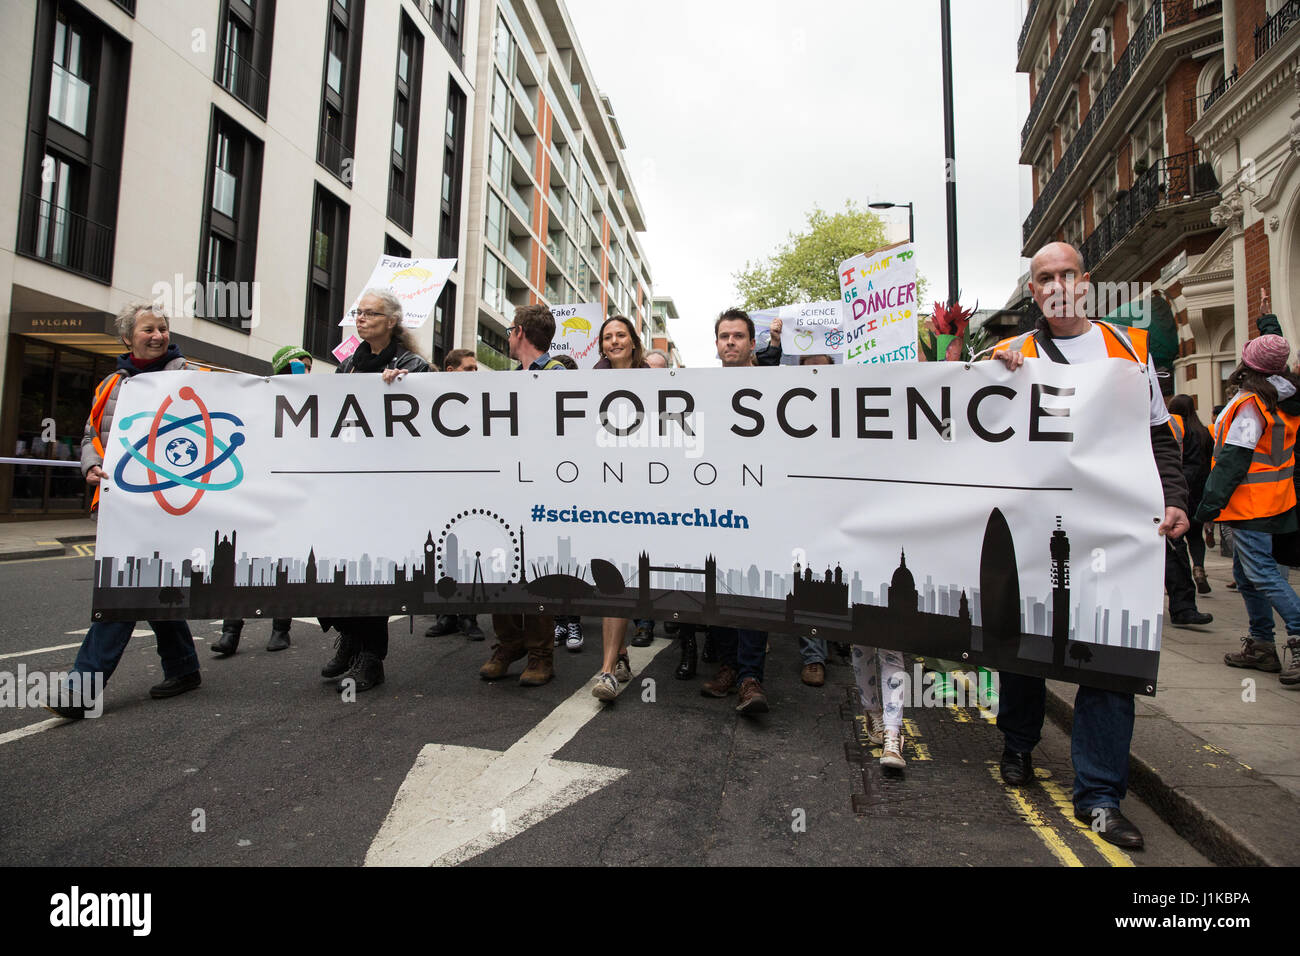 London, UK. 22nd Apr, 2017. Scientists march through central London on the ‘March for Science' as part of a global protest march in the name of science. The organisers of the march, which took place on Earth Day, stated that science is ‘under attack' from the administration of President Trump, with cuts to research funding into climate change and cancer and controversial statements by advisors such as Scott Pruitt, head of the US Environmental Protection Agency, who denied that carbon dioxide emissions are a primary cause of global warming. Credit: Mark Kerrison/Alamy Live News Stock Photo